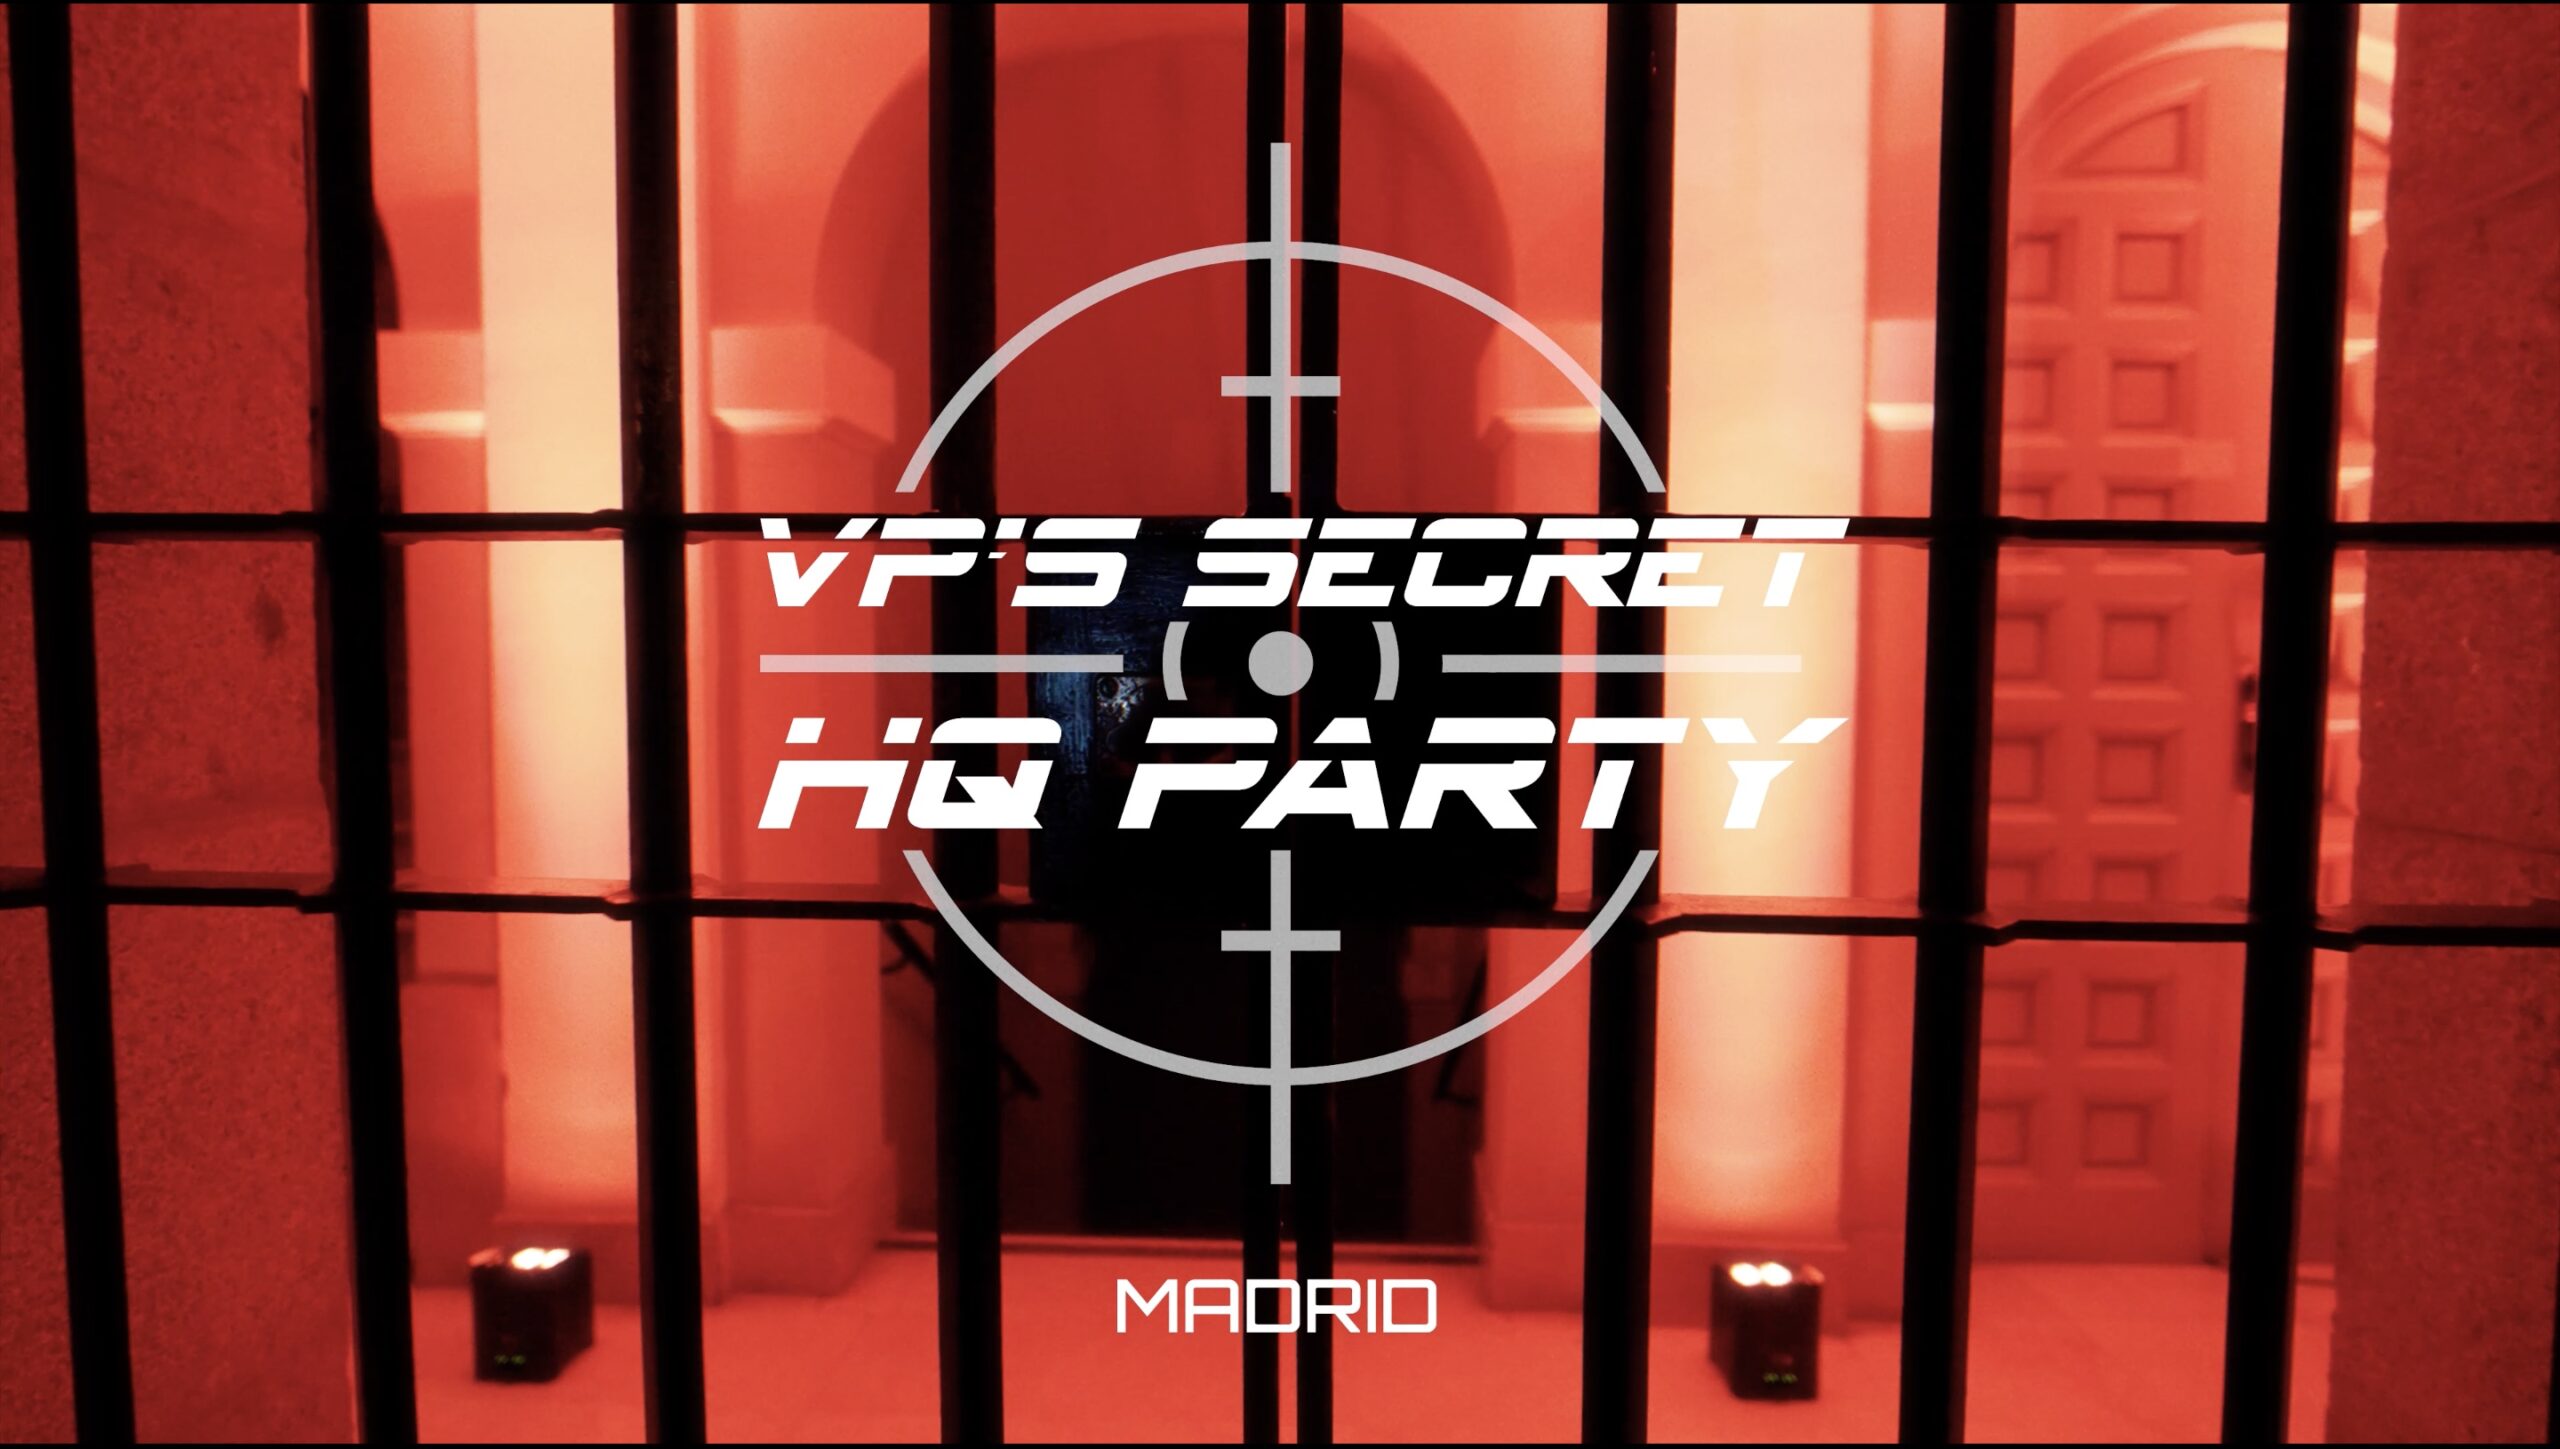 Secret HQ Party in Madrid